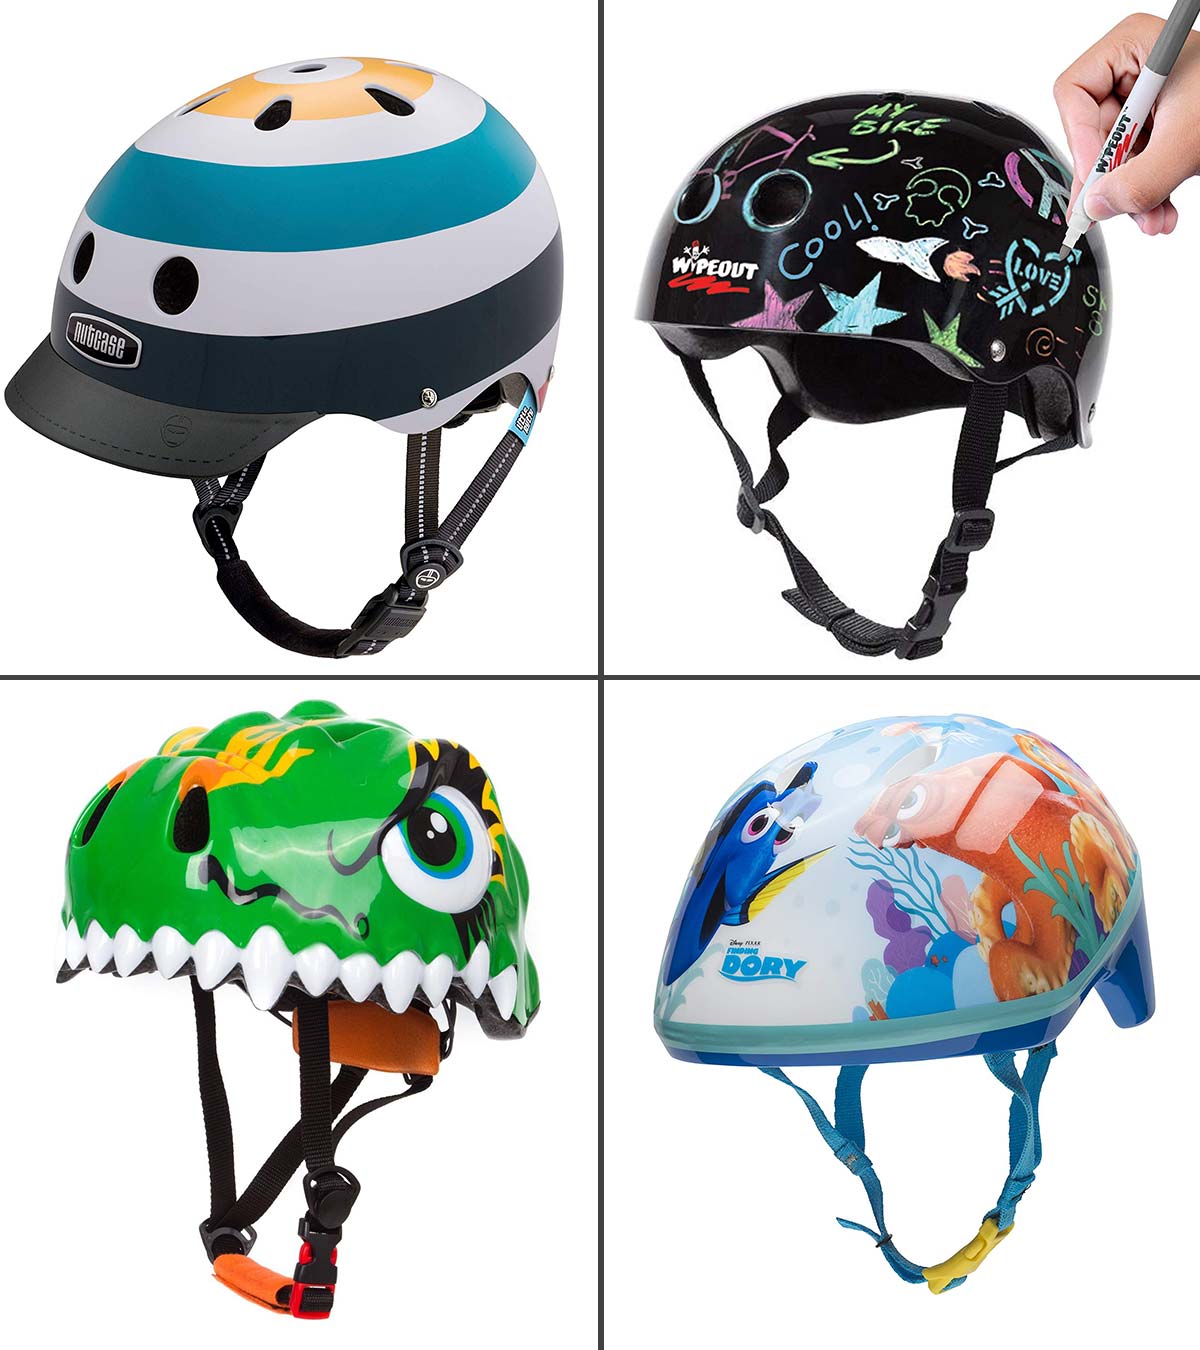 Ages 3-7 Durable Kid Bicycle Helmets with Fun Designs Boys And Girls Will LOVE,Blue Bike Helmet Adjustable From Toddler To Youth Size 